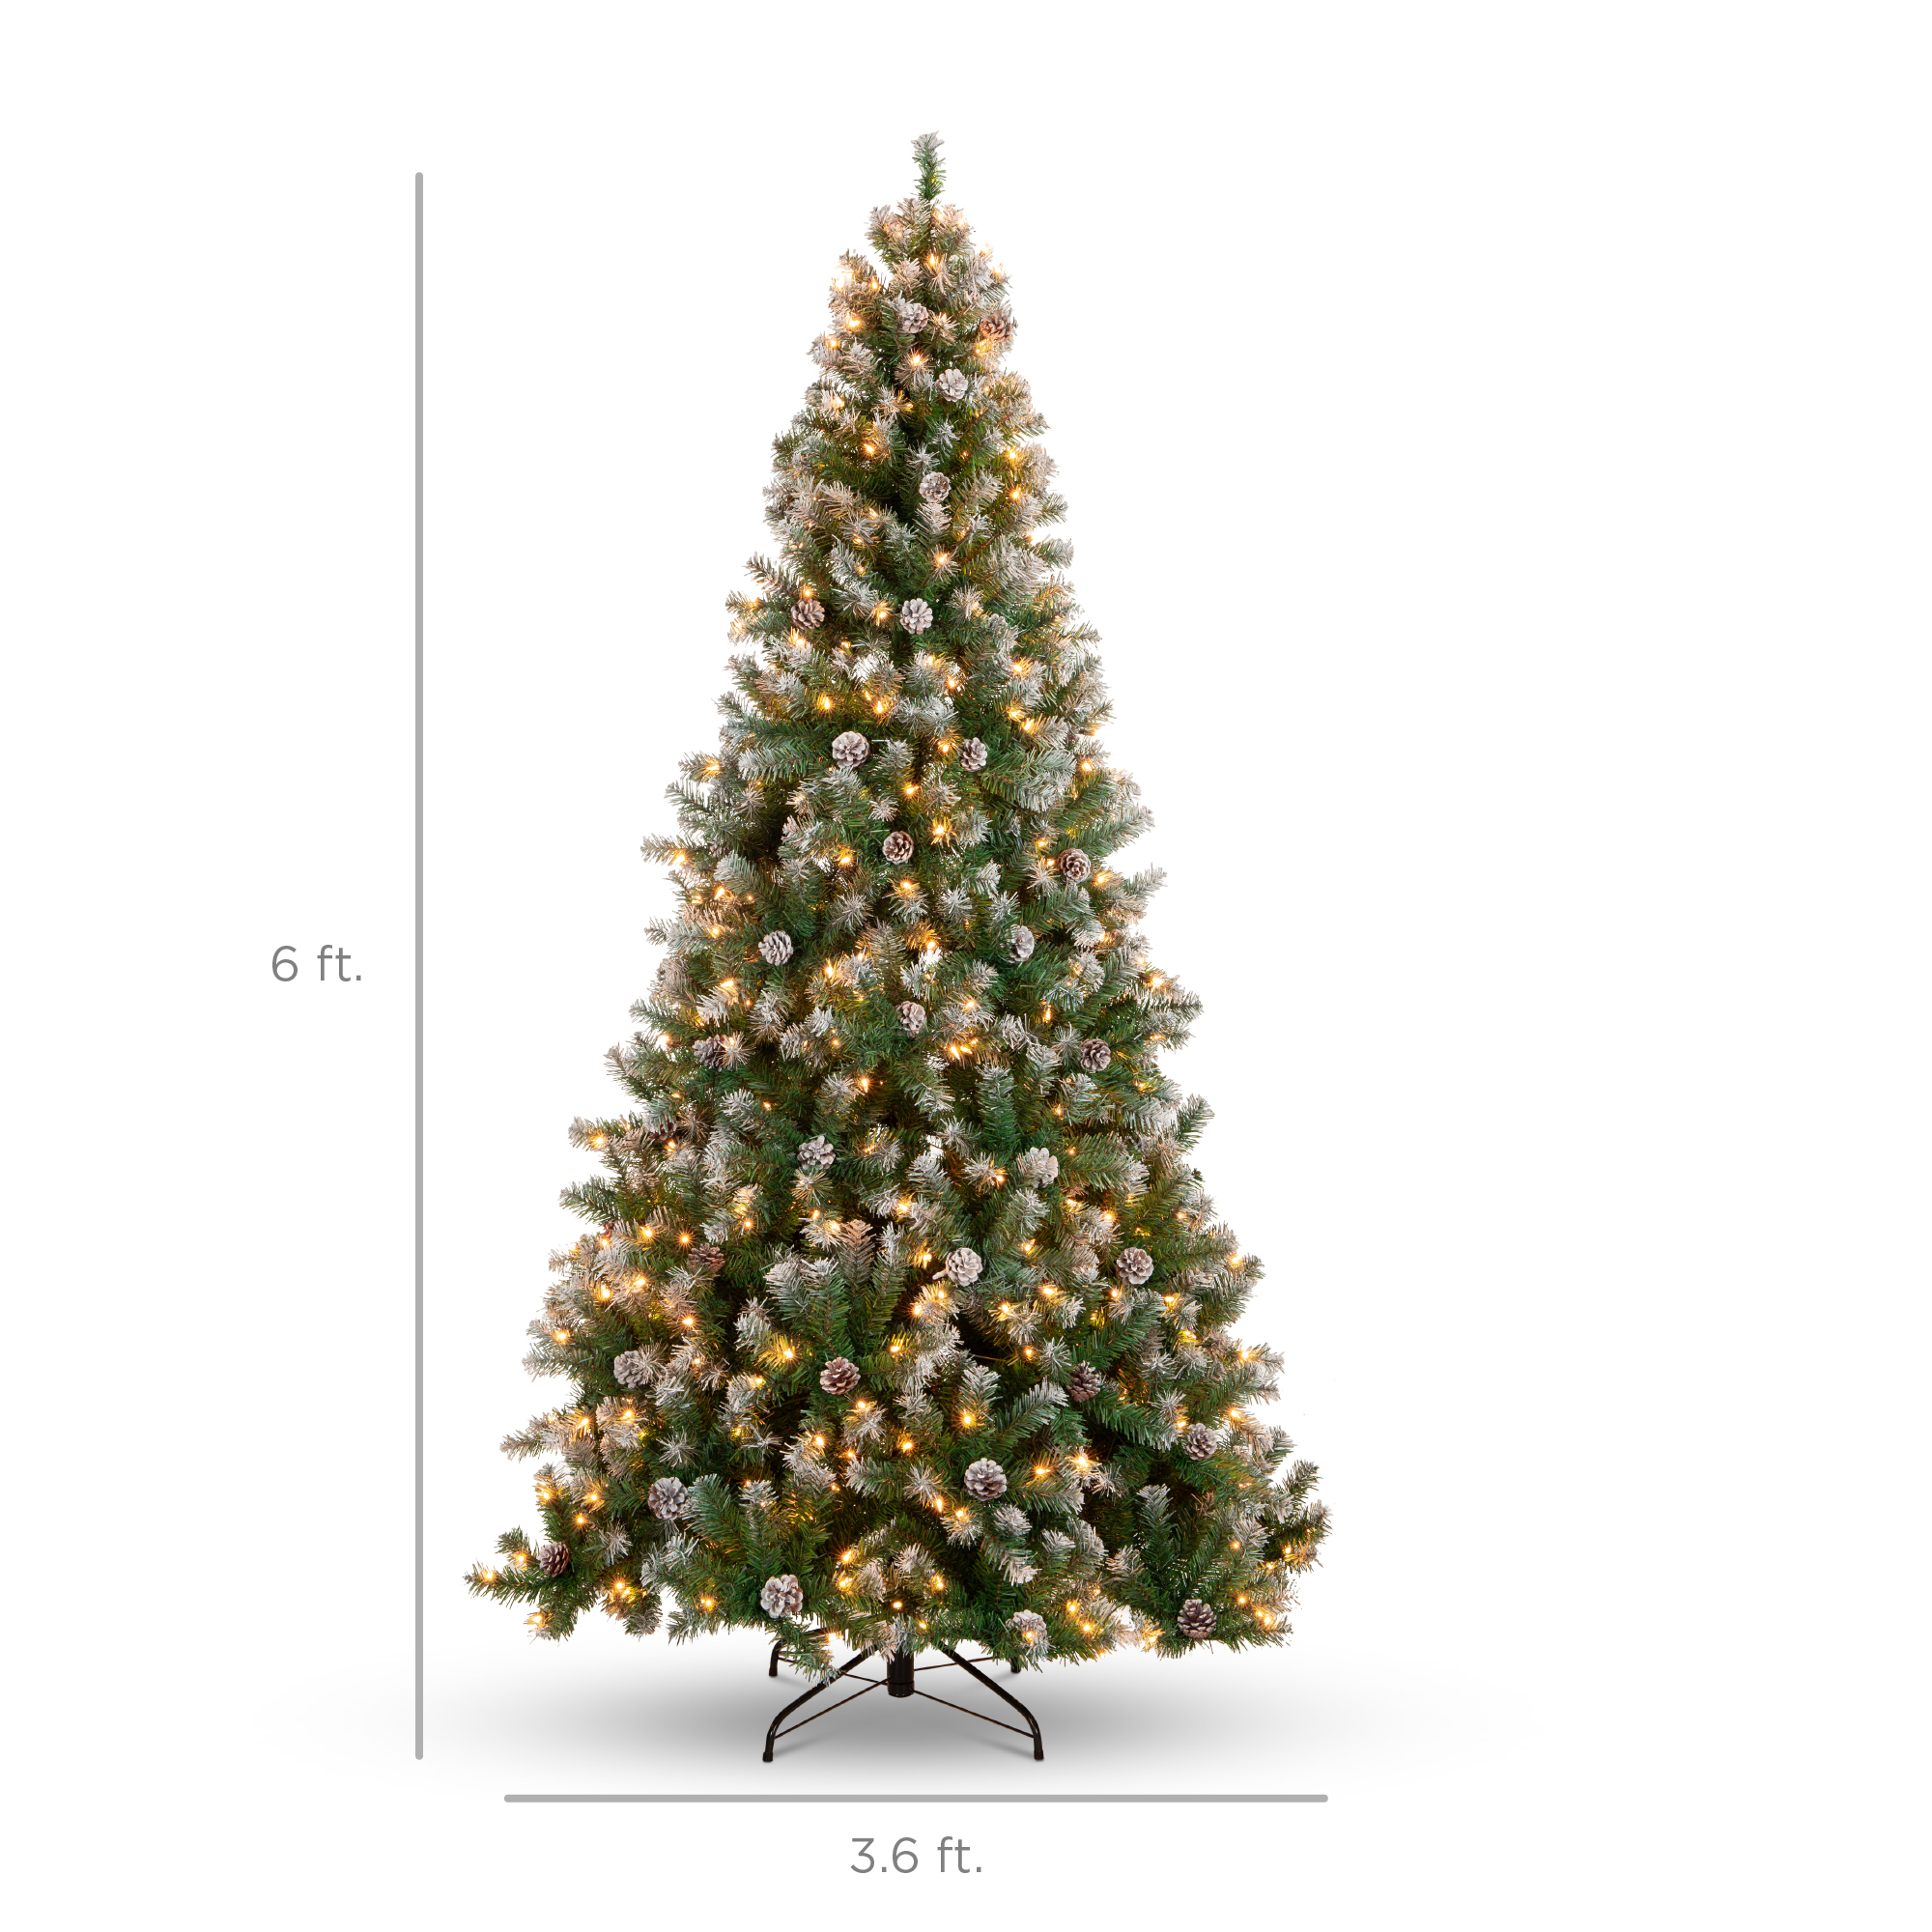 Best Choice Products 6ft Pre-Lit Pre-Decorated Holiday Christmas Tree w/ 1,000 Flocked Tips, 250 Lights, Metal Base - image 7 of 7